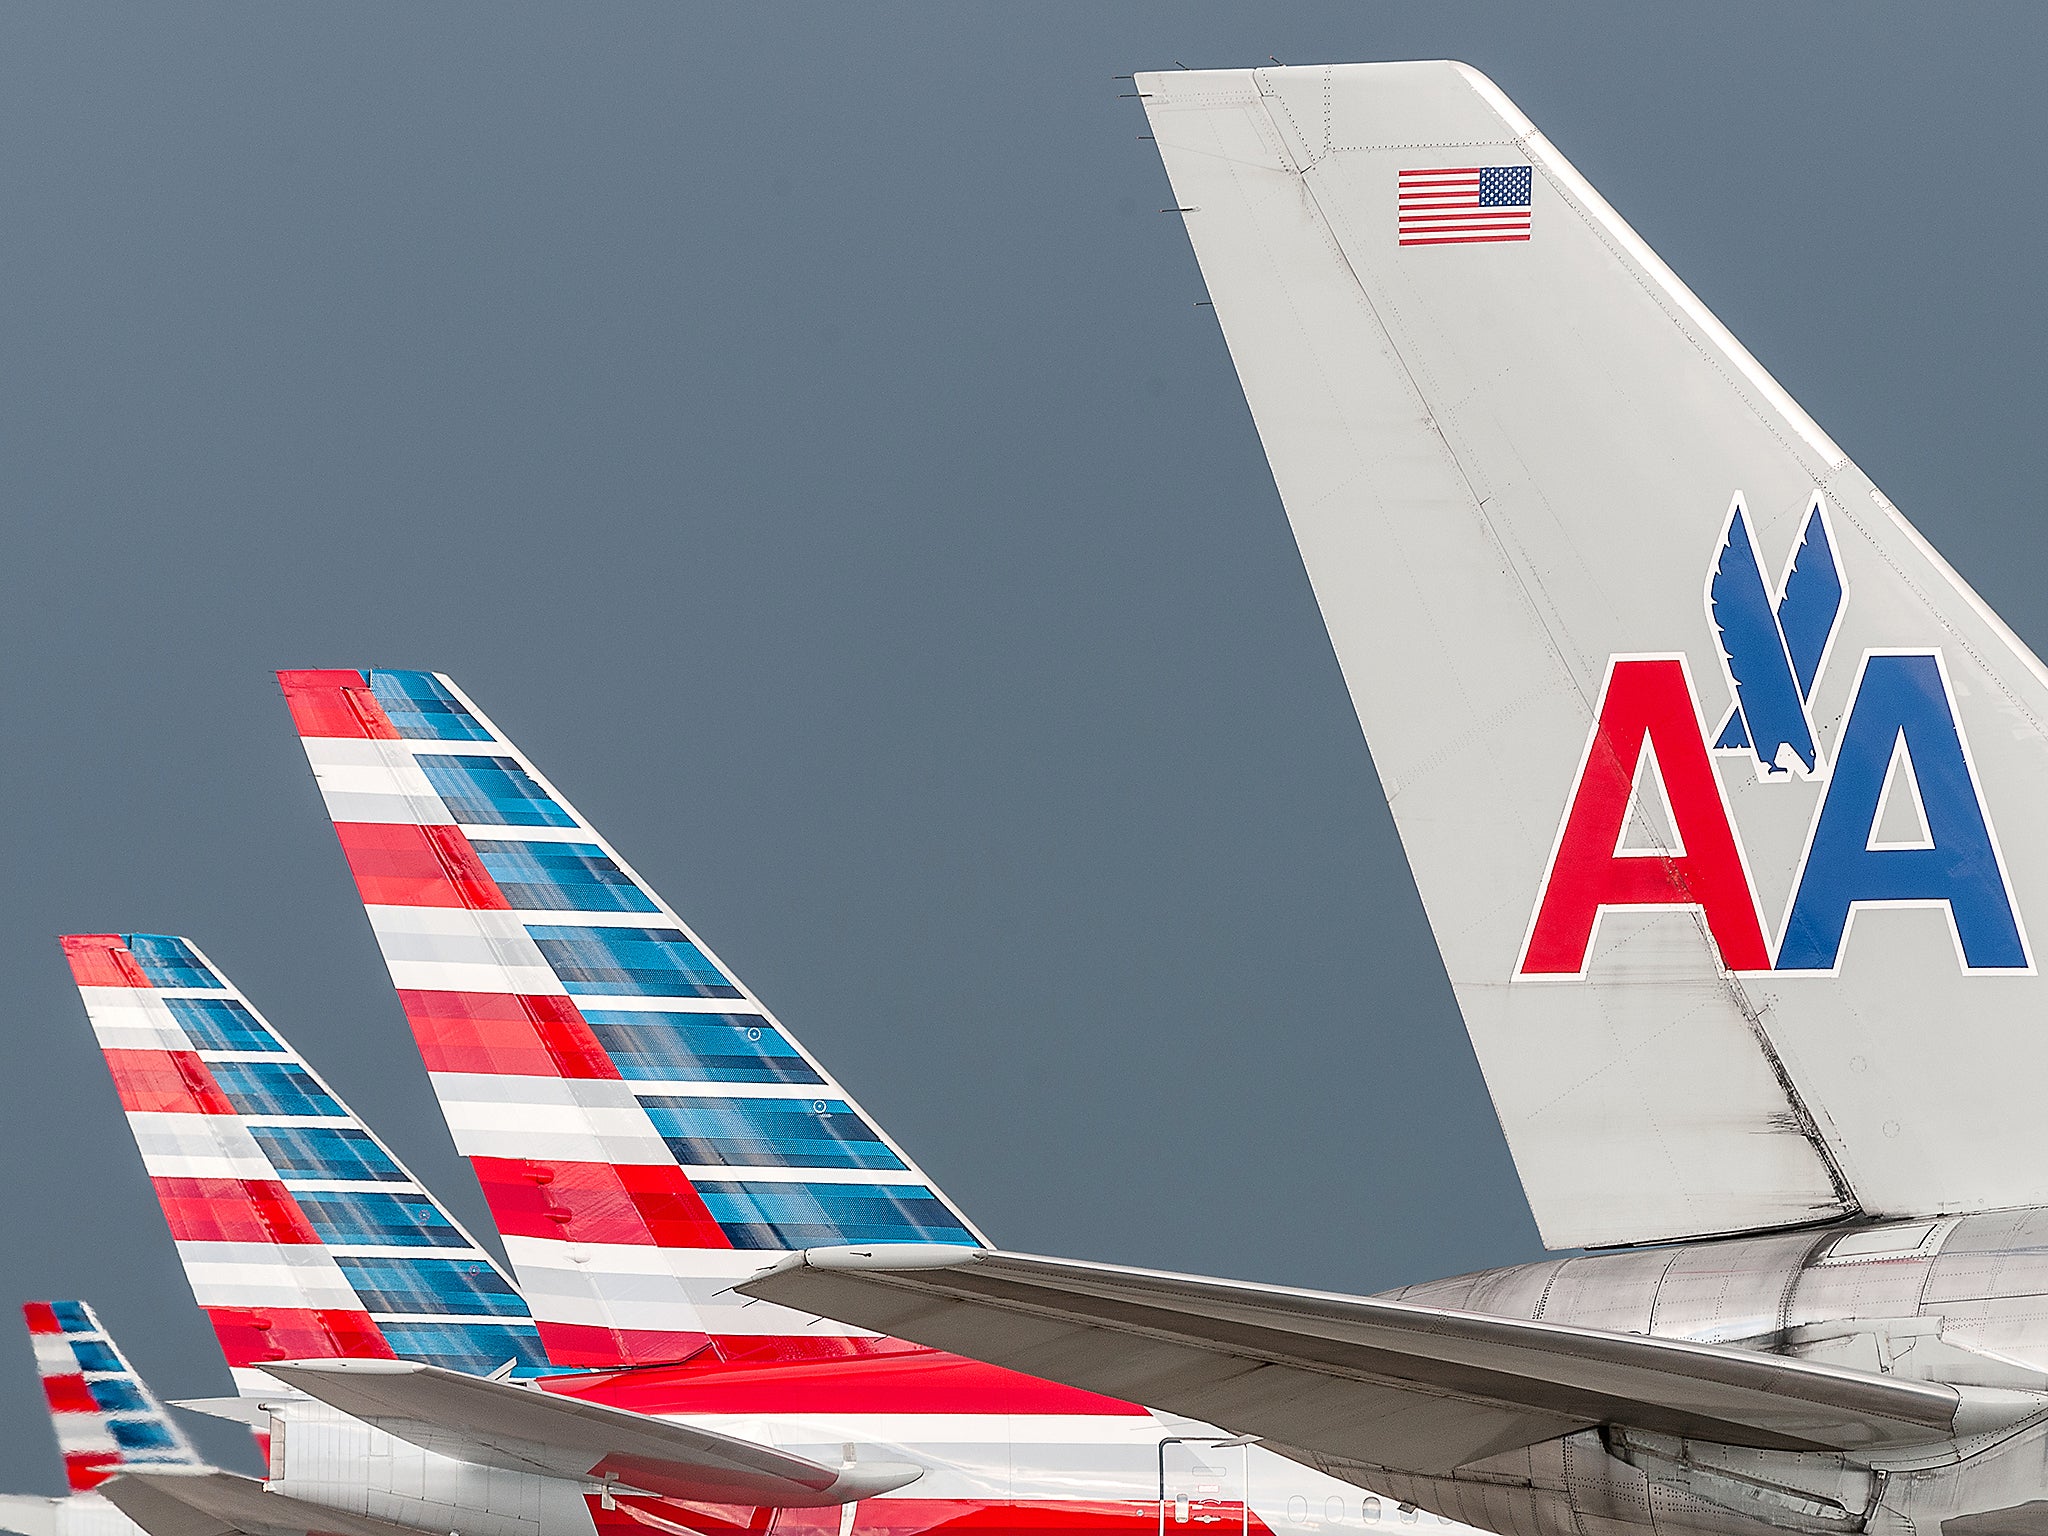 The incident took place on an American Airlines flight